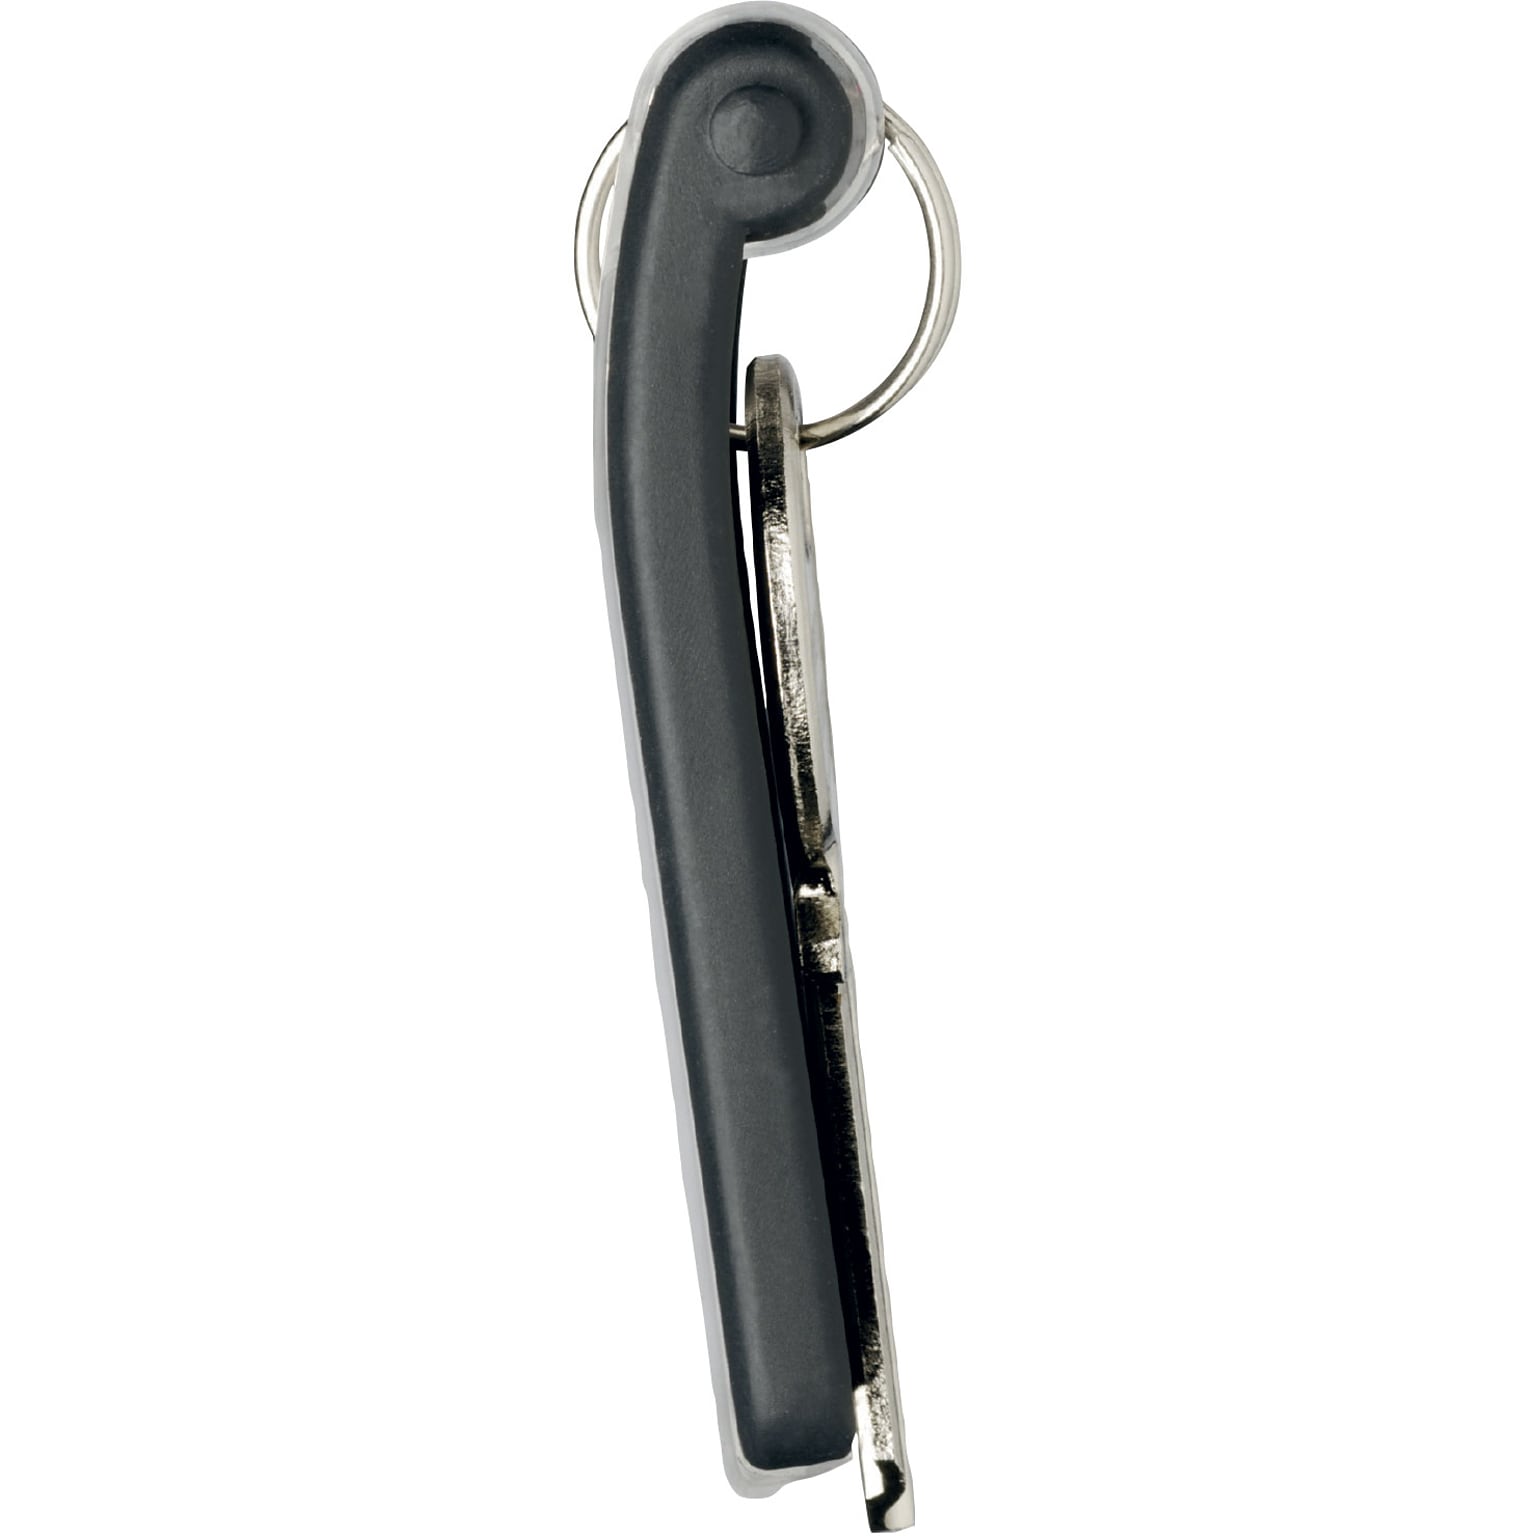 Key Tags with Paper Inserts for Locking Key Cabinets, Black, 6/Pk